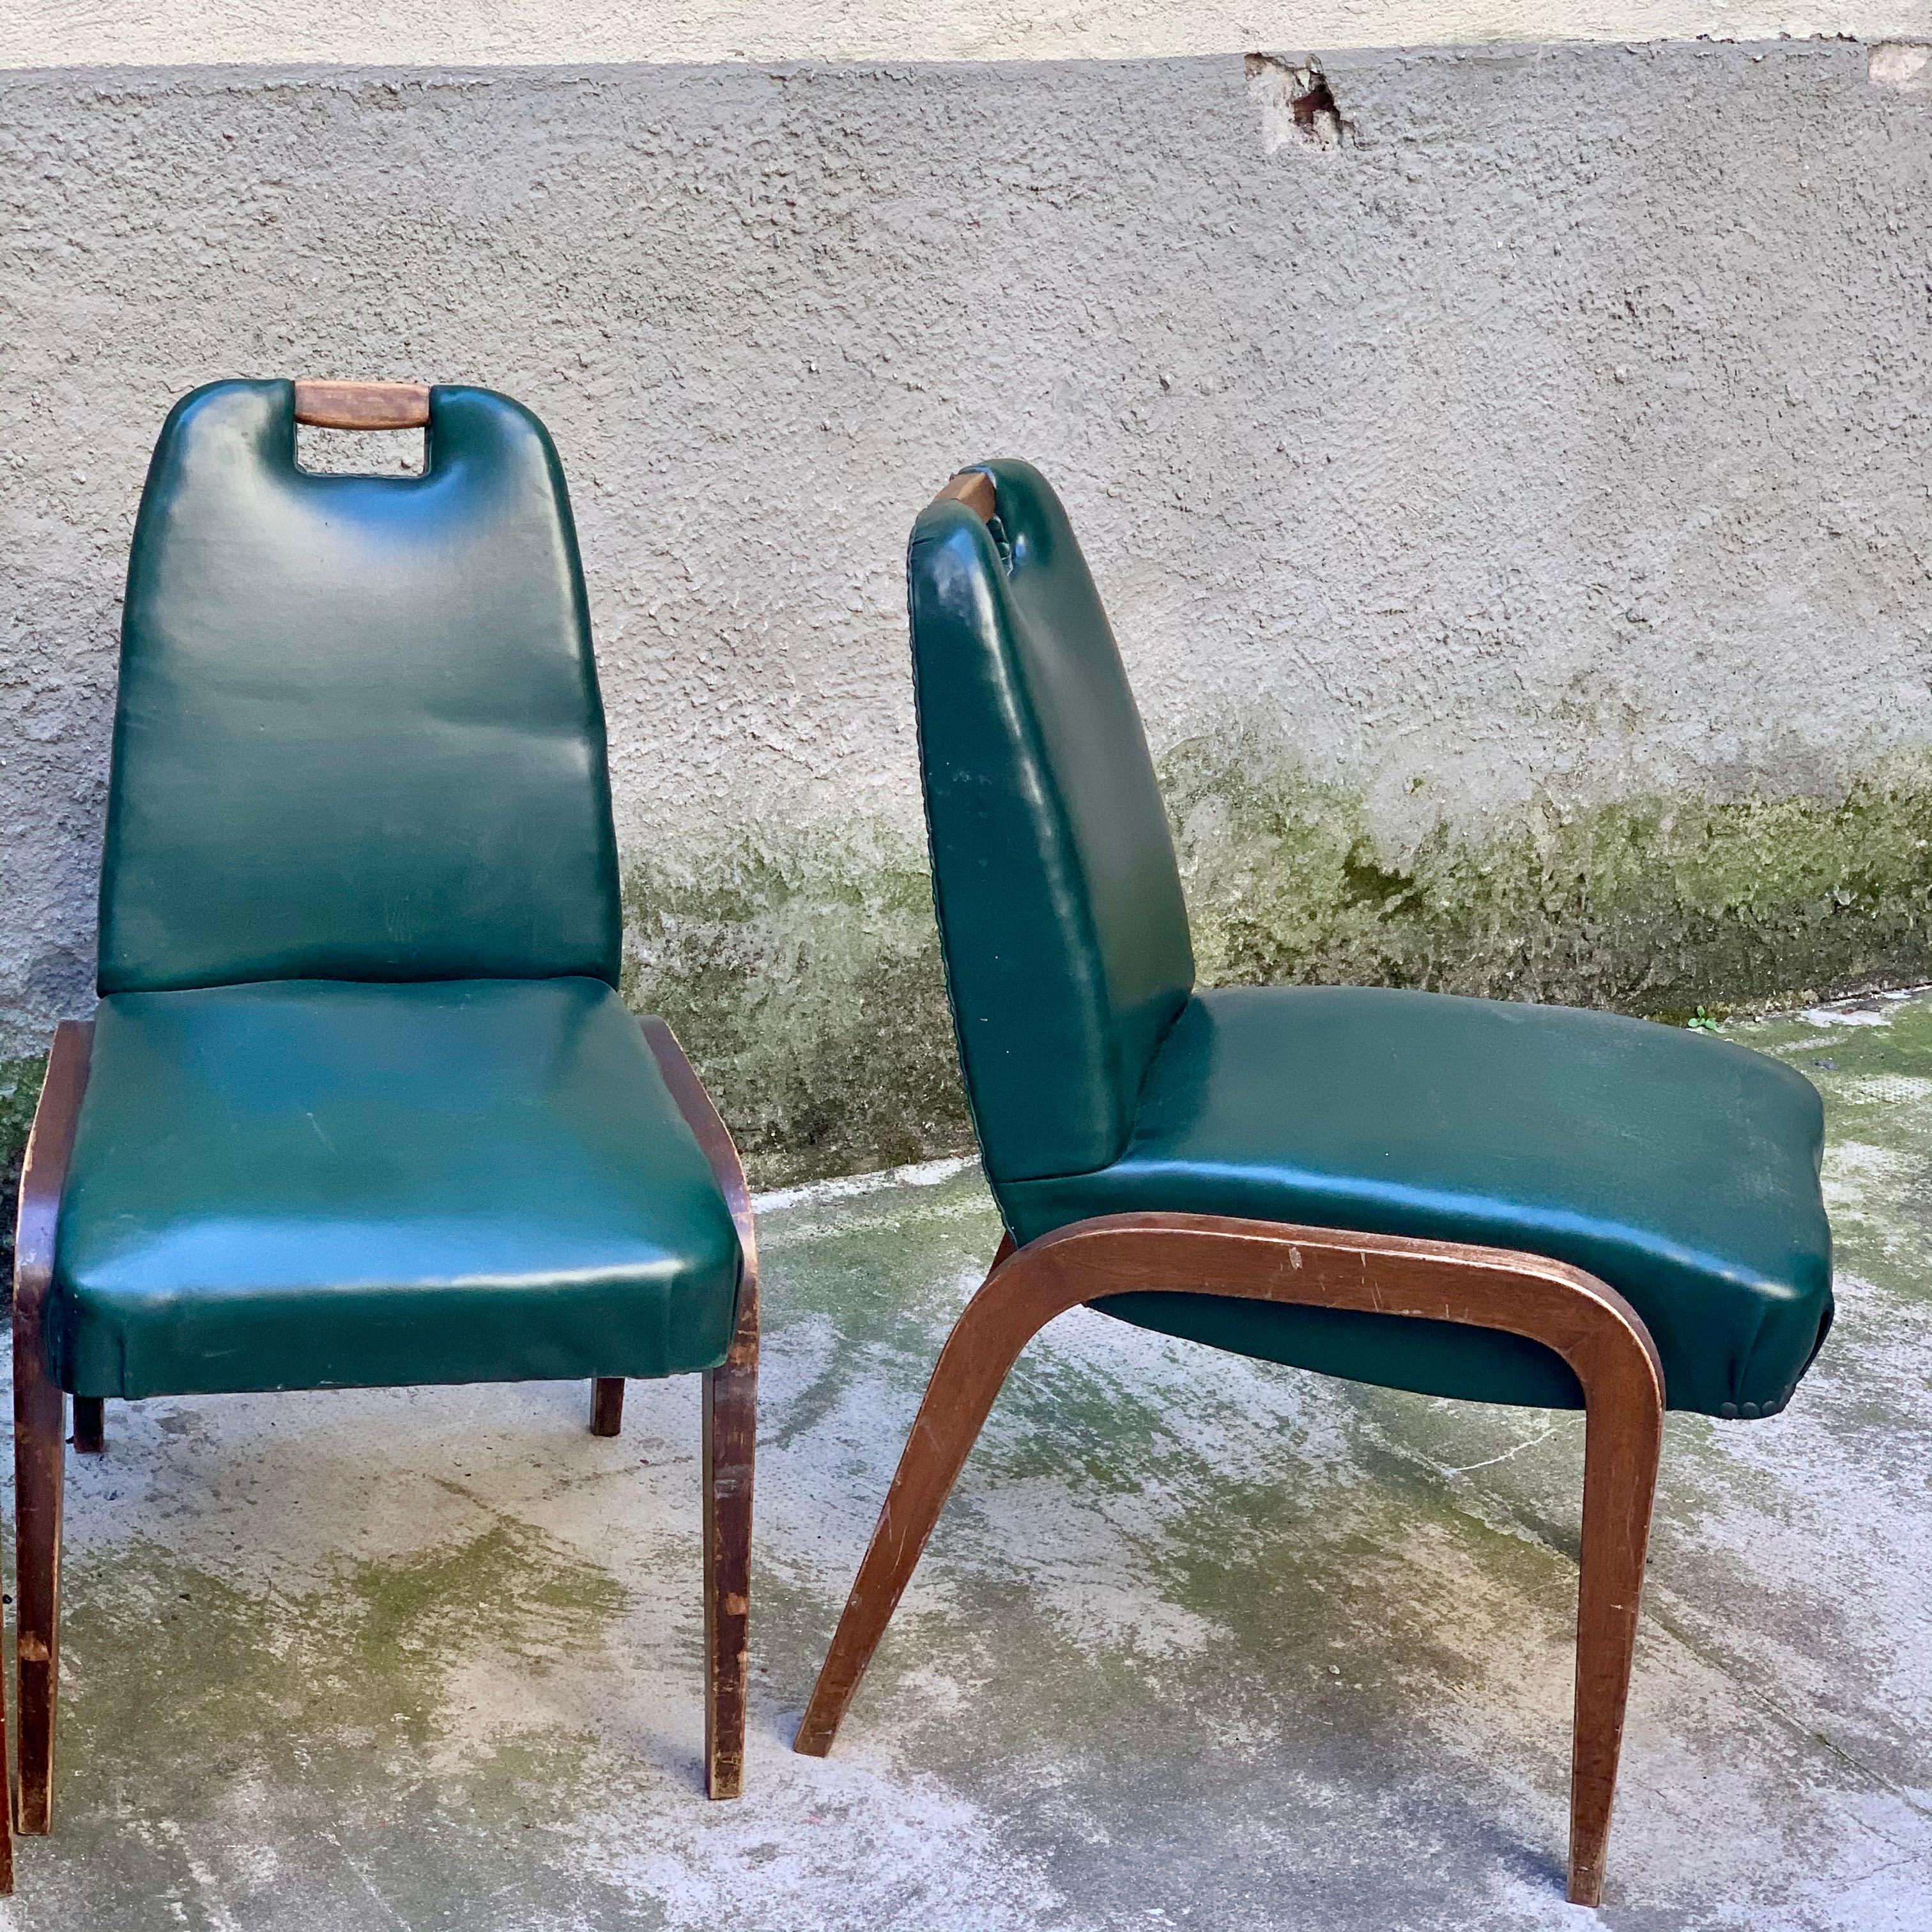 Set of 4 Wood and Leatherette Chairs - Italy - 1930s For Sale 2